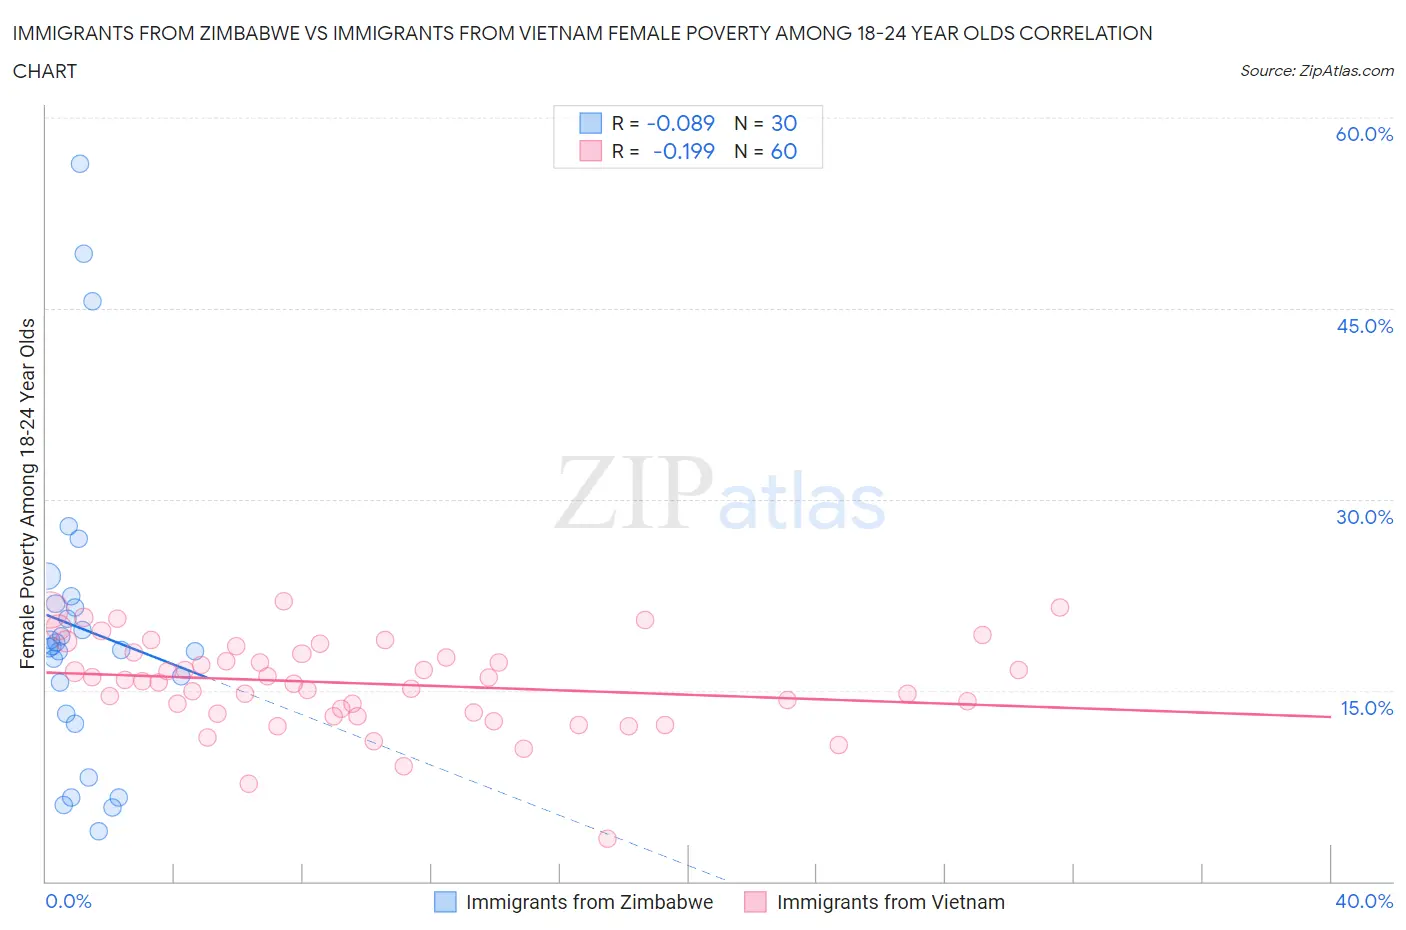 Immigrants from Zimbabwe vs Immigrants from Vietnam Female Poverty Among 18-24 Year Olds